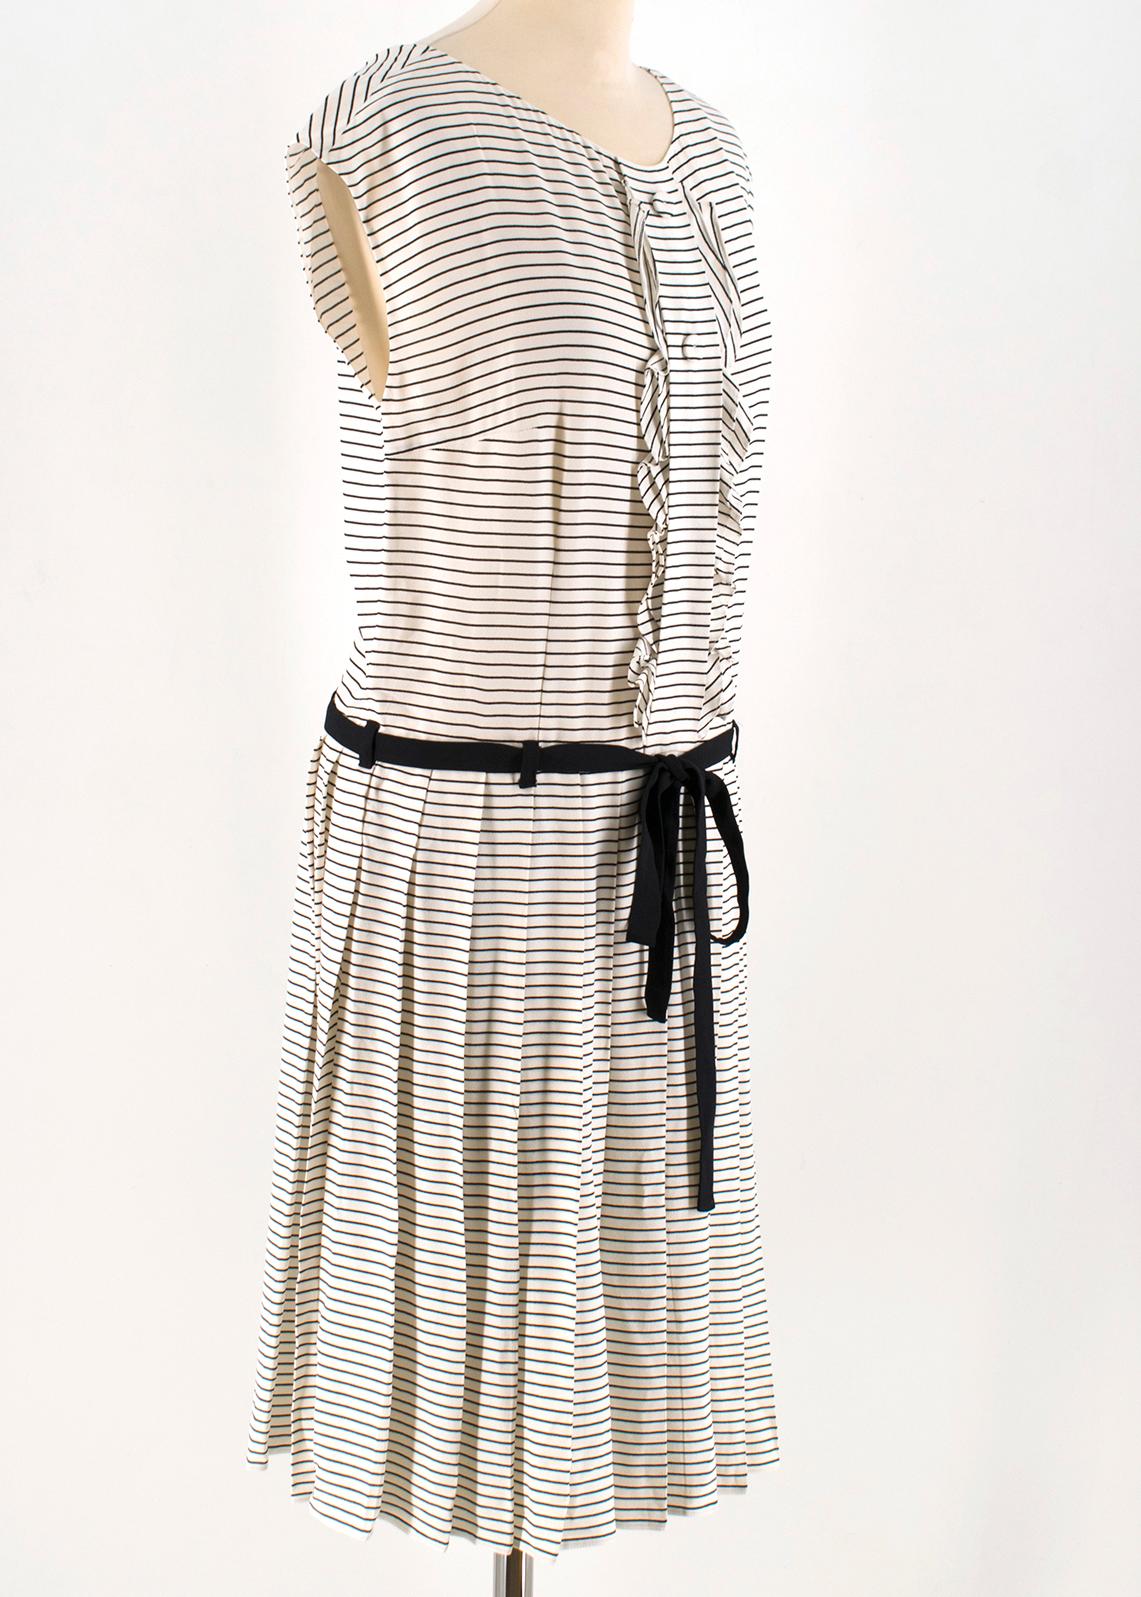 Prada Tie-Waist Striped Crepe Dress

-Cream and black striped, mid-weight crepe 
-Round neck, capped sleeves 
-Decorative placket and two buttons, ruffle-trimmed edges 
-Drop waist, black crepe waist tie 
-Pleated skirt 
-Centre-back concealed zip